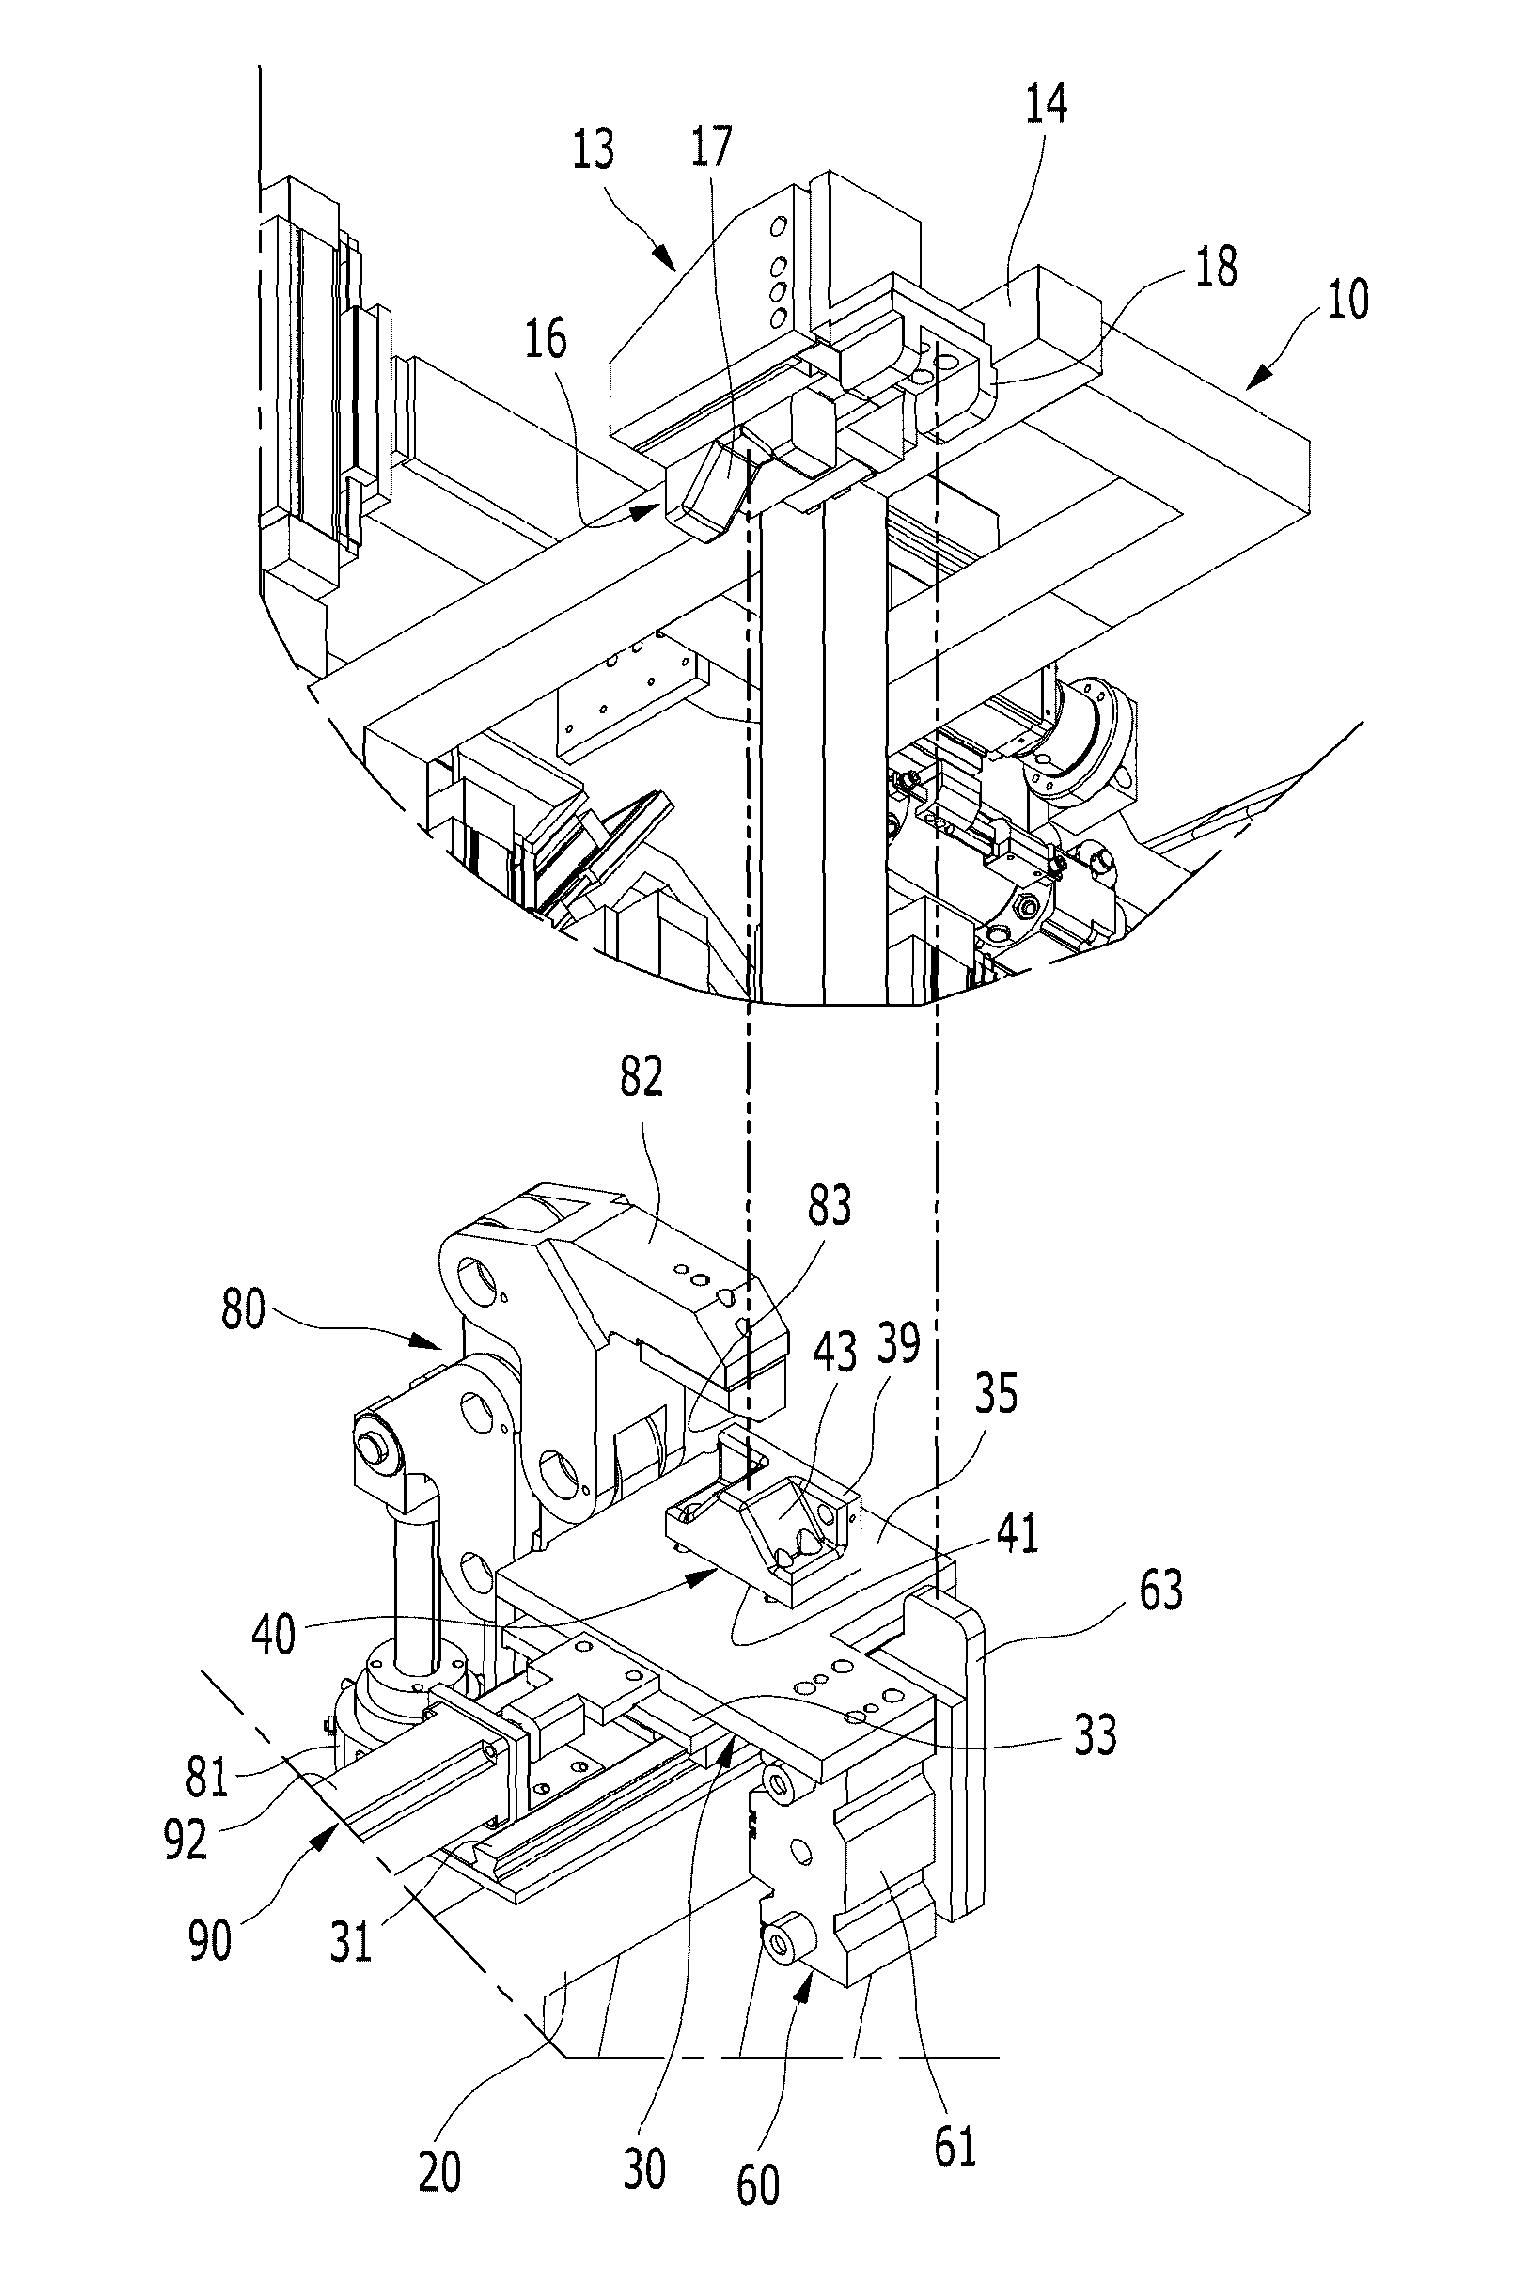 Side positioning device for a system for assembling vehicle body panels